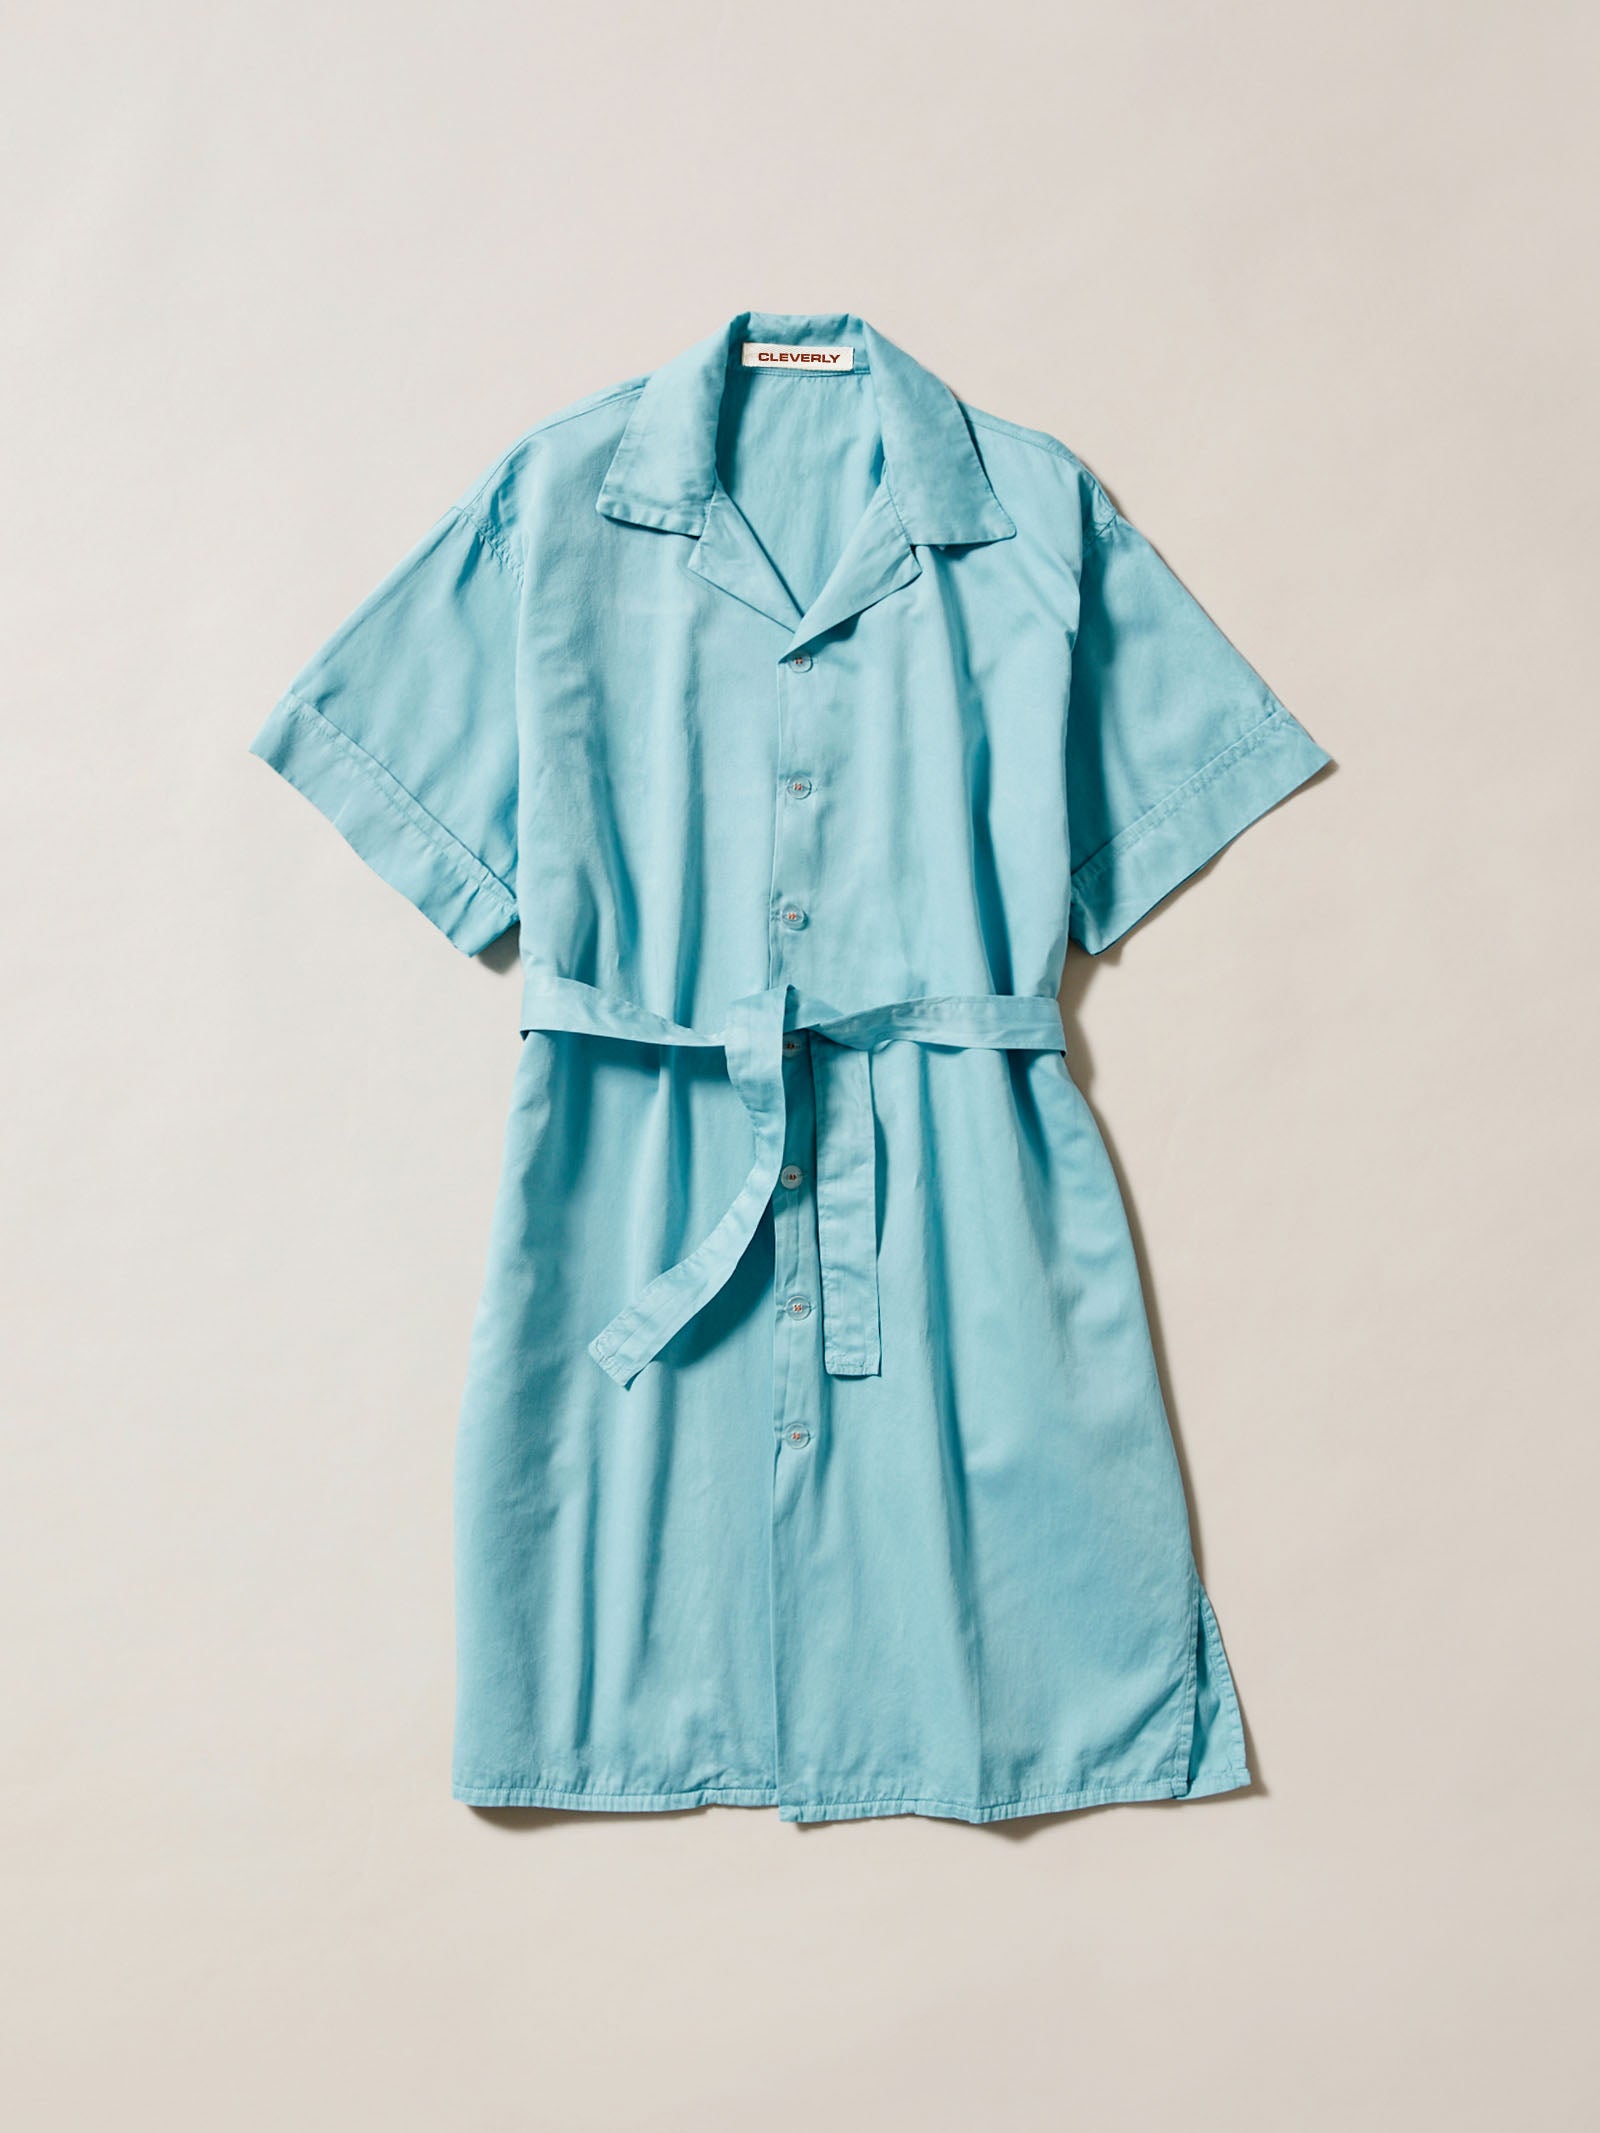 100% cotton, light blue button down shirt dress, casual dress or luxury cotton nightwear, short sleeves and mid length